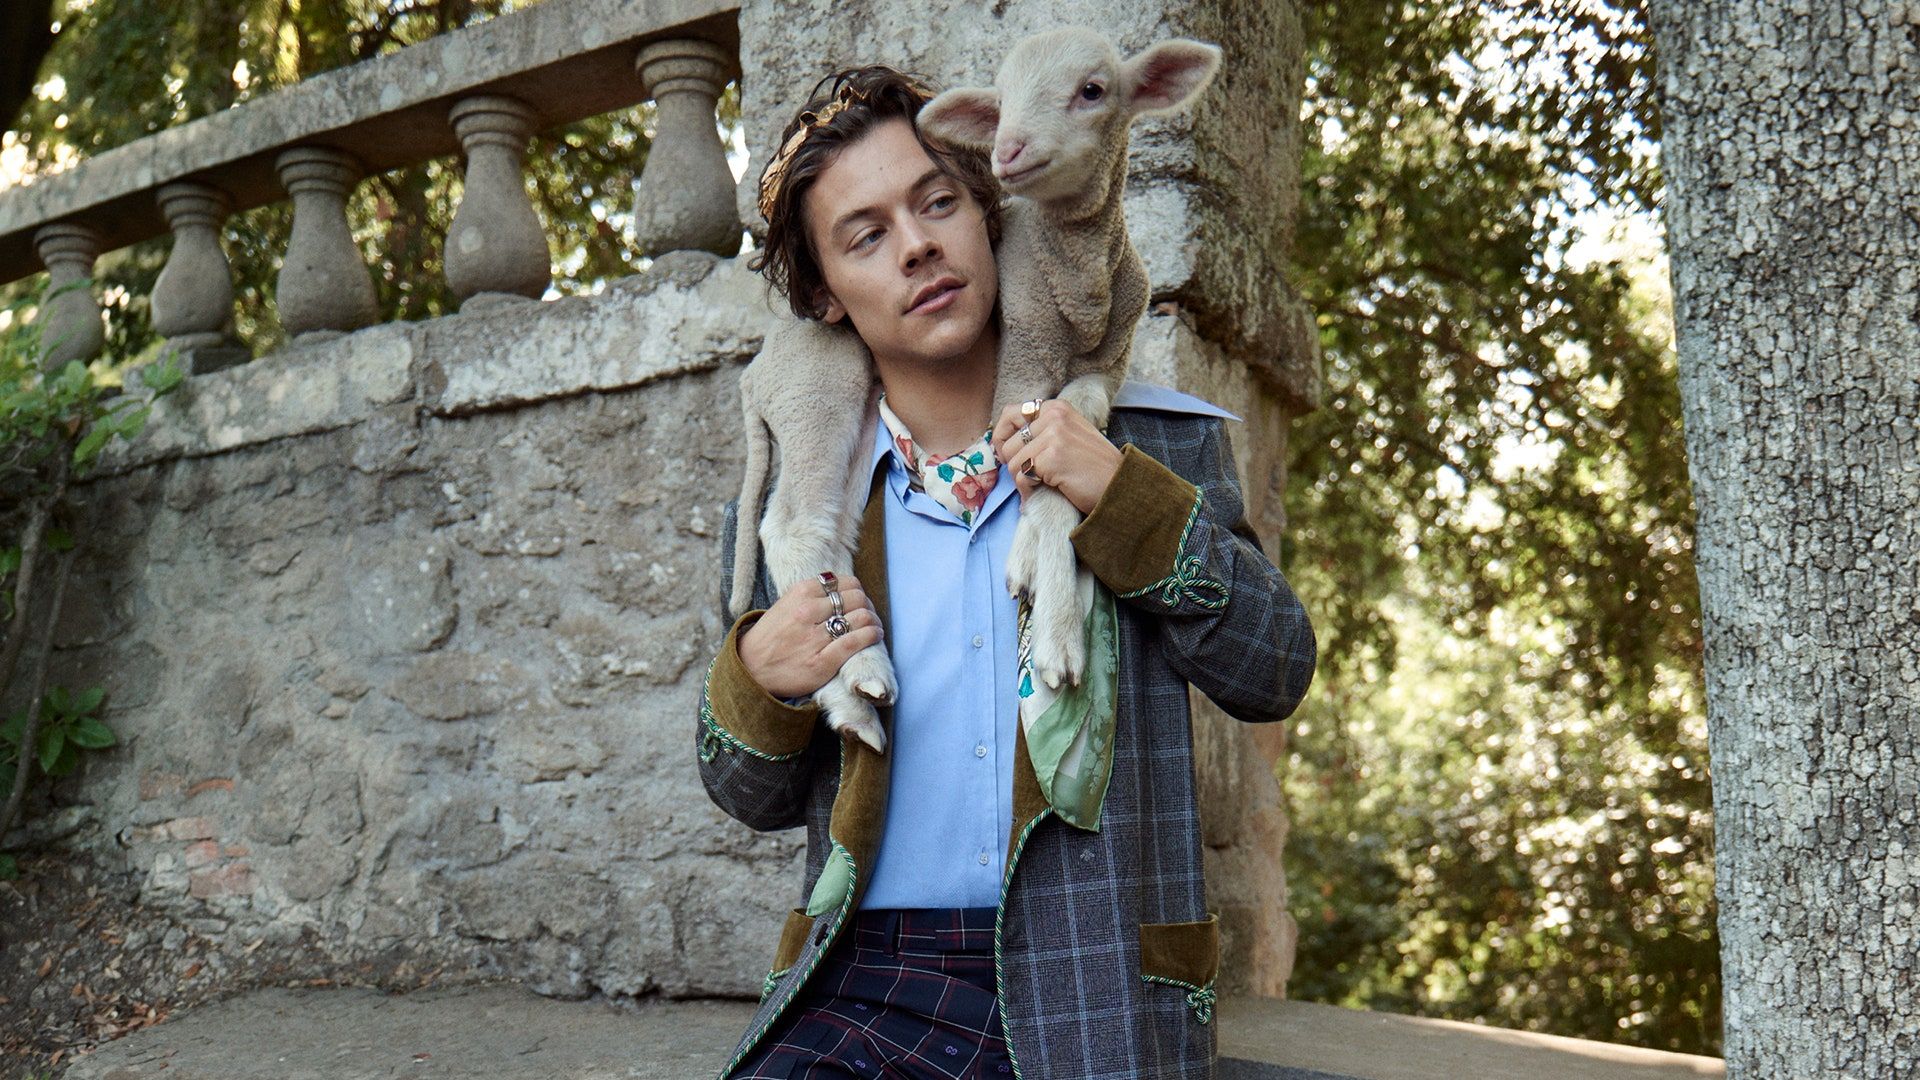 Harry Styles Stars In Second Gucci Campaign For Cruise 2019 Men's Tailoring Collection